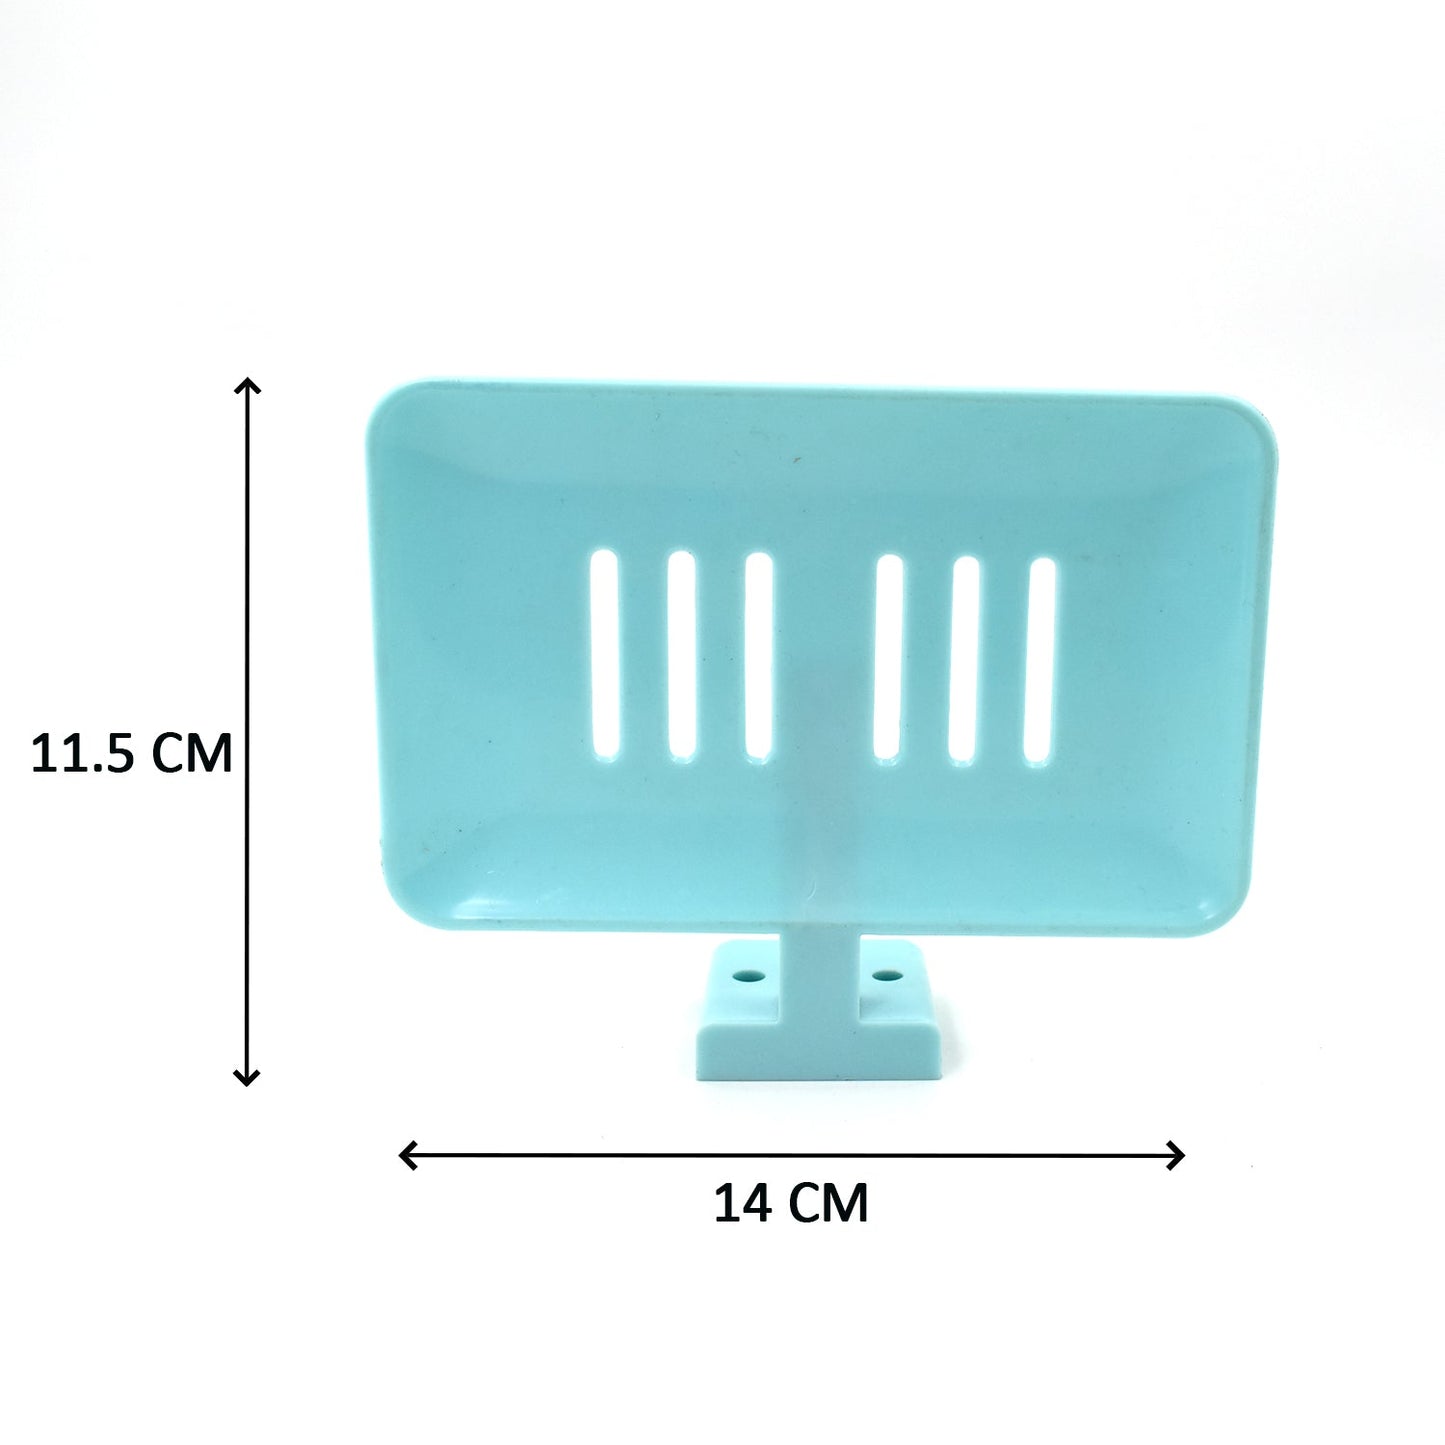 3701 Bath Wall Soap Dish widely used by all types of peoples for holding and as a soap stand in all kinds of bathroom places etc.